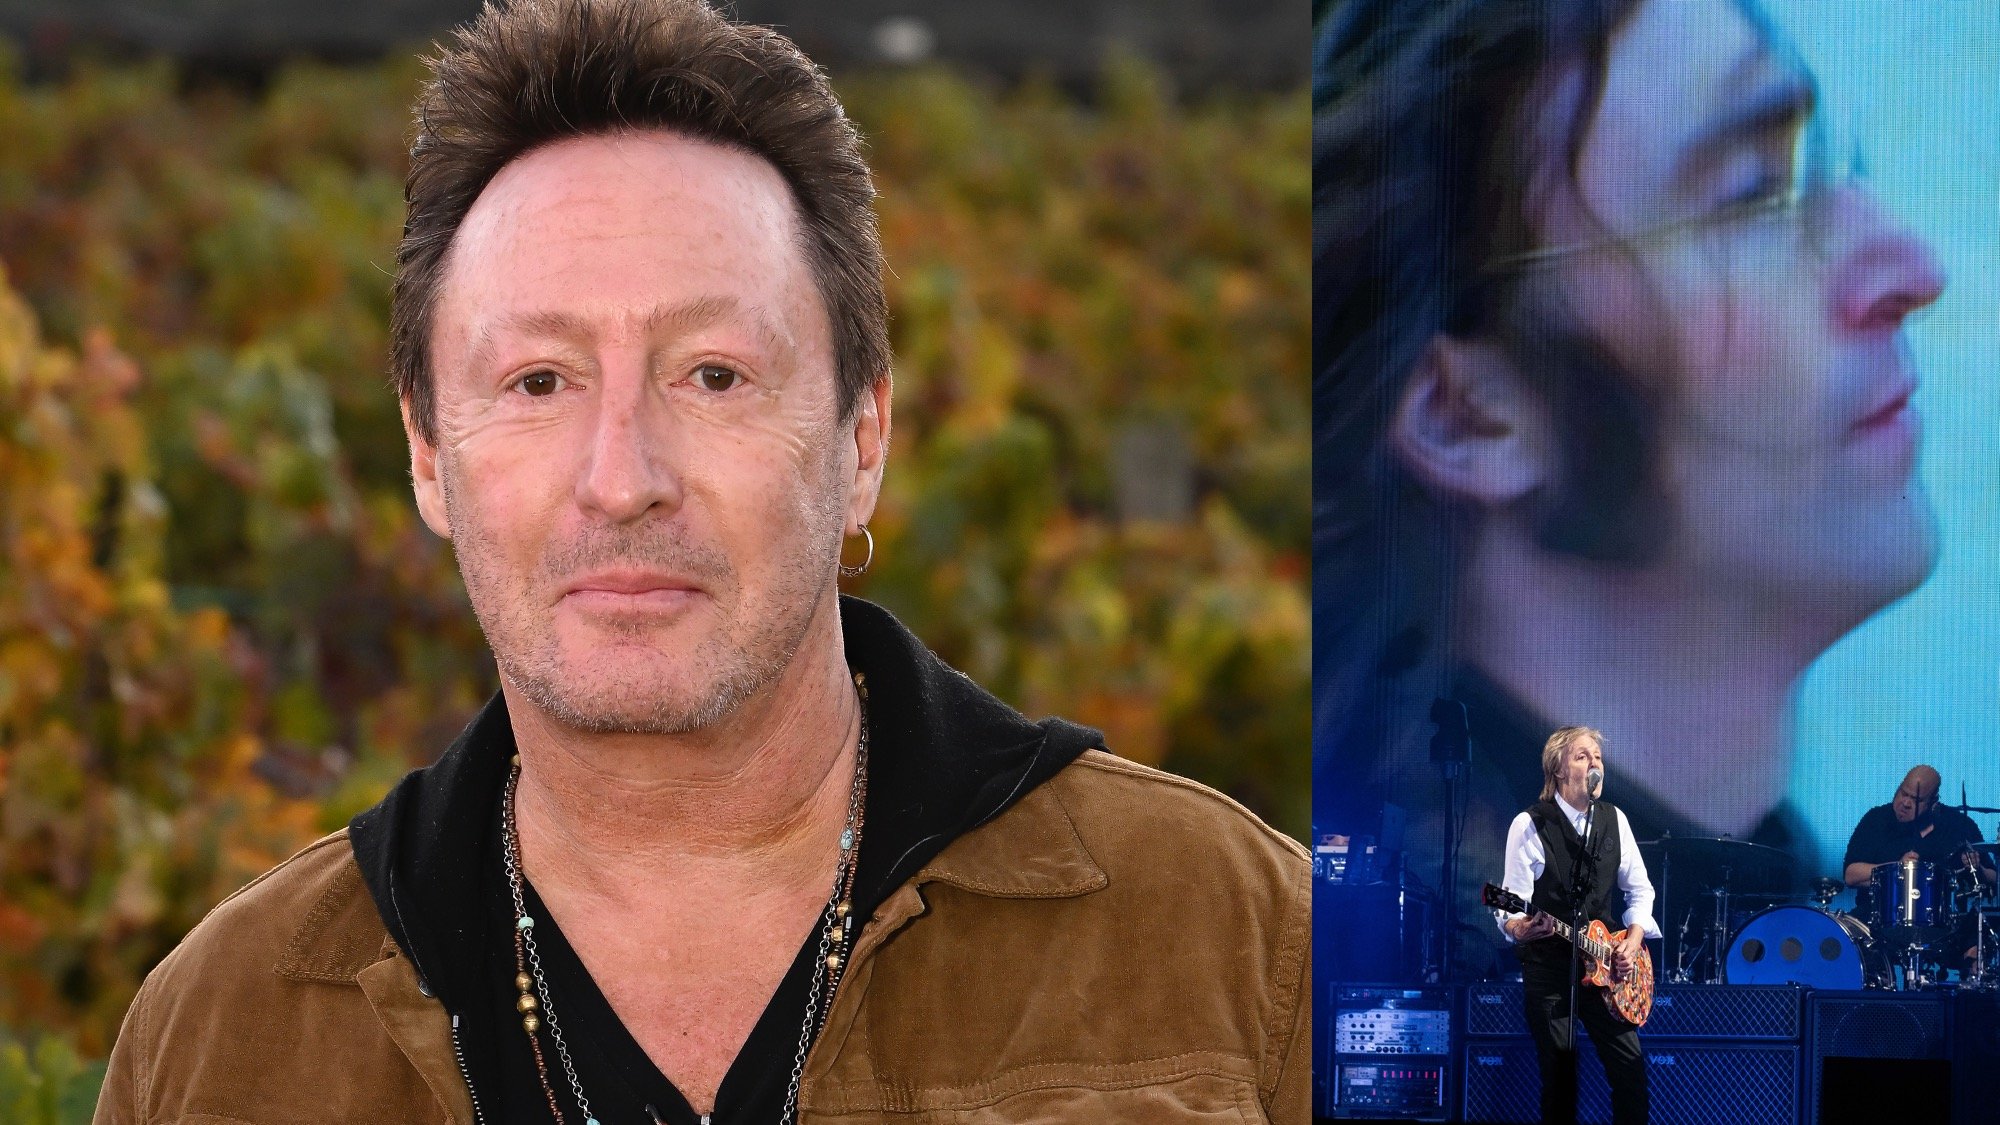 (L) Julian Lennon attends Day 1 of Live In The Vineyard at Robert Mondavi Winery on November 01, 2022. (R) Paul McCartney performs on The Pyramid Stage during day four of Glastonbury Festival at Worthy Farm, Pilton on June 25, 2022.